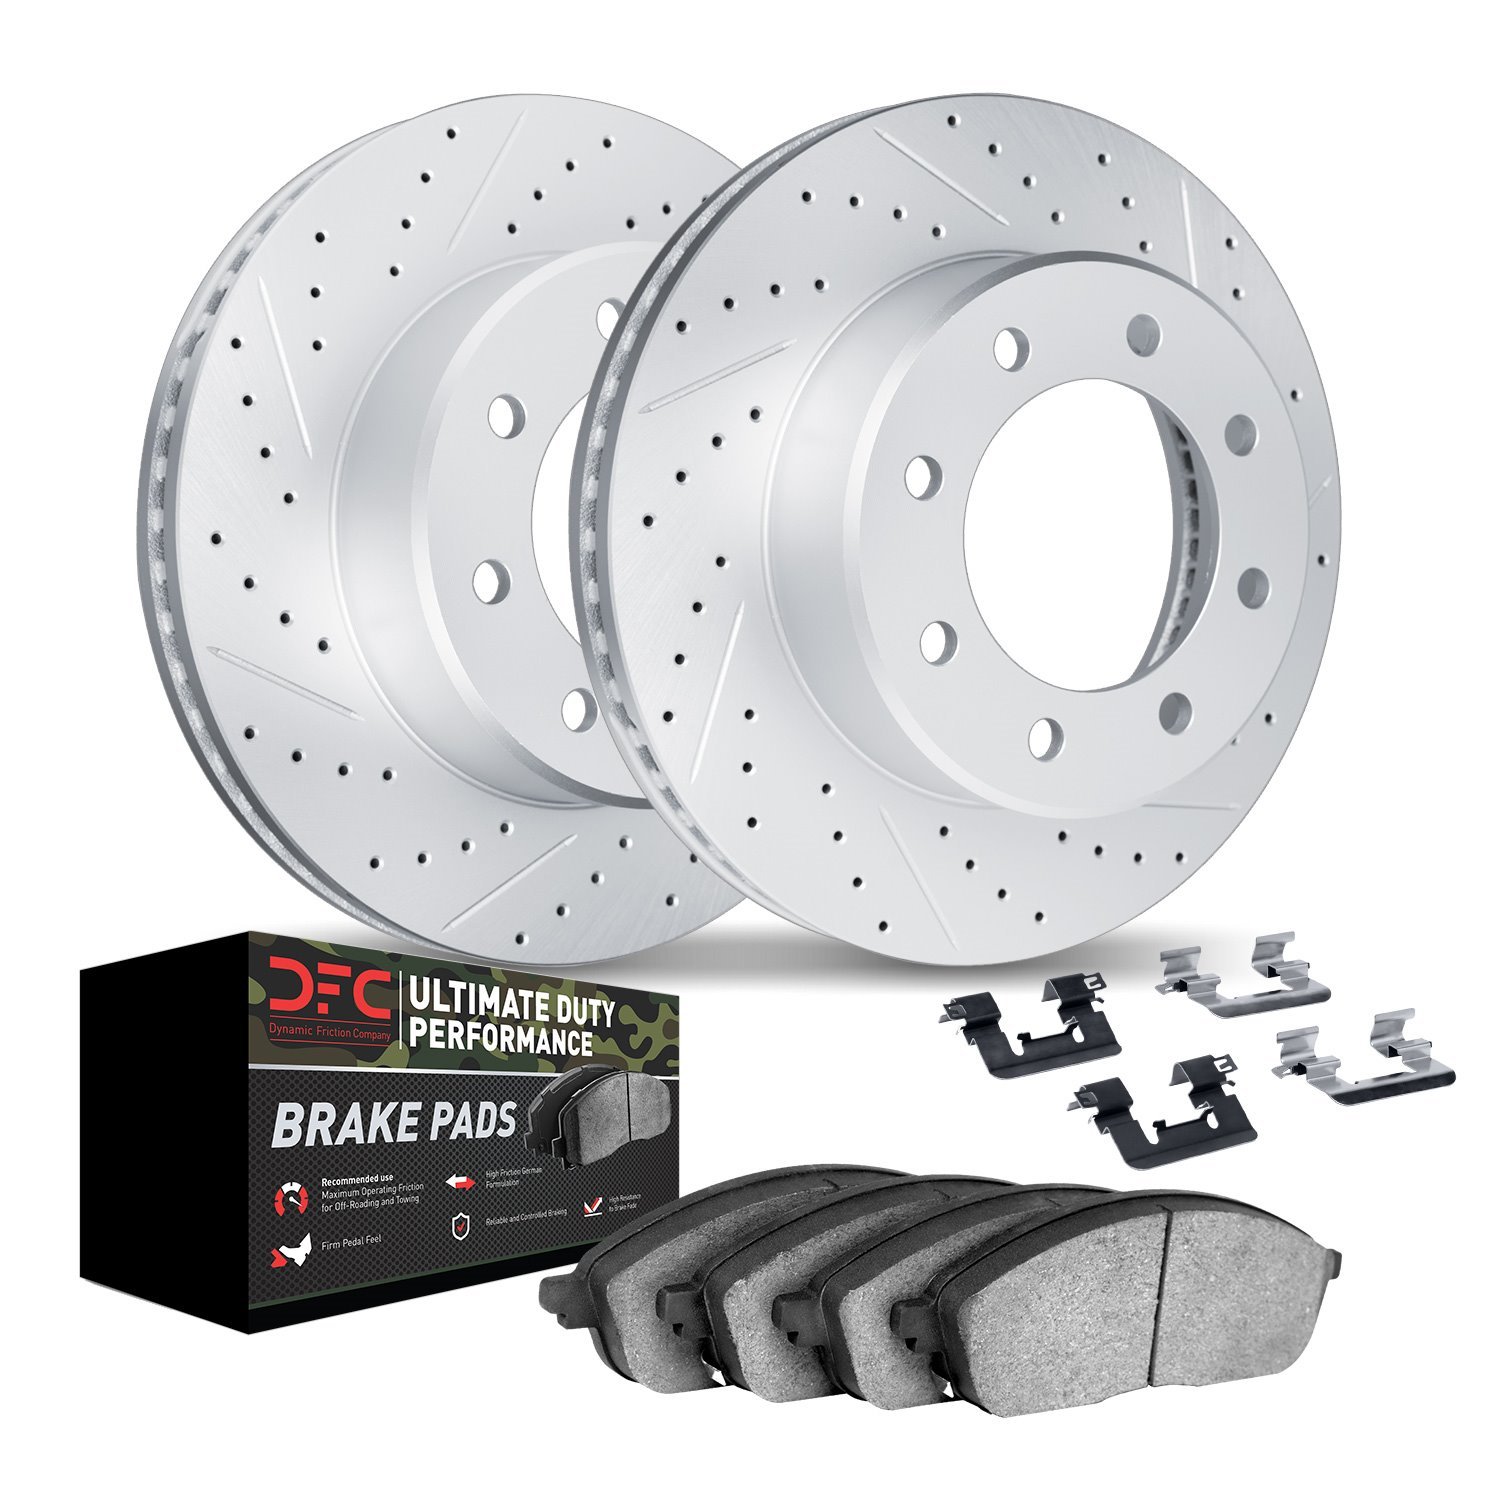 2412-48033 Geoperformance Drilled/Slotted Brake Rotors with Ultimate-Duty Brake Pads Kit & Hardware, 2011-2019 GM, Position: Rea